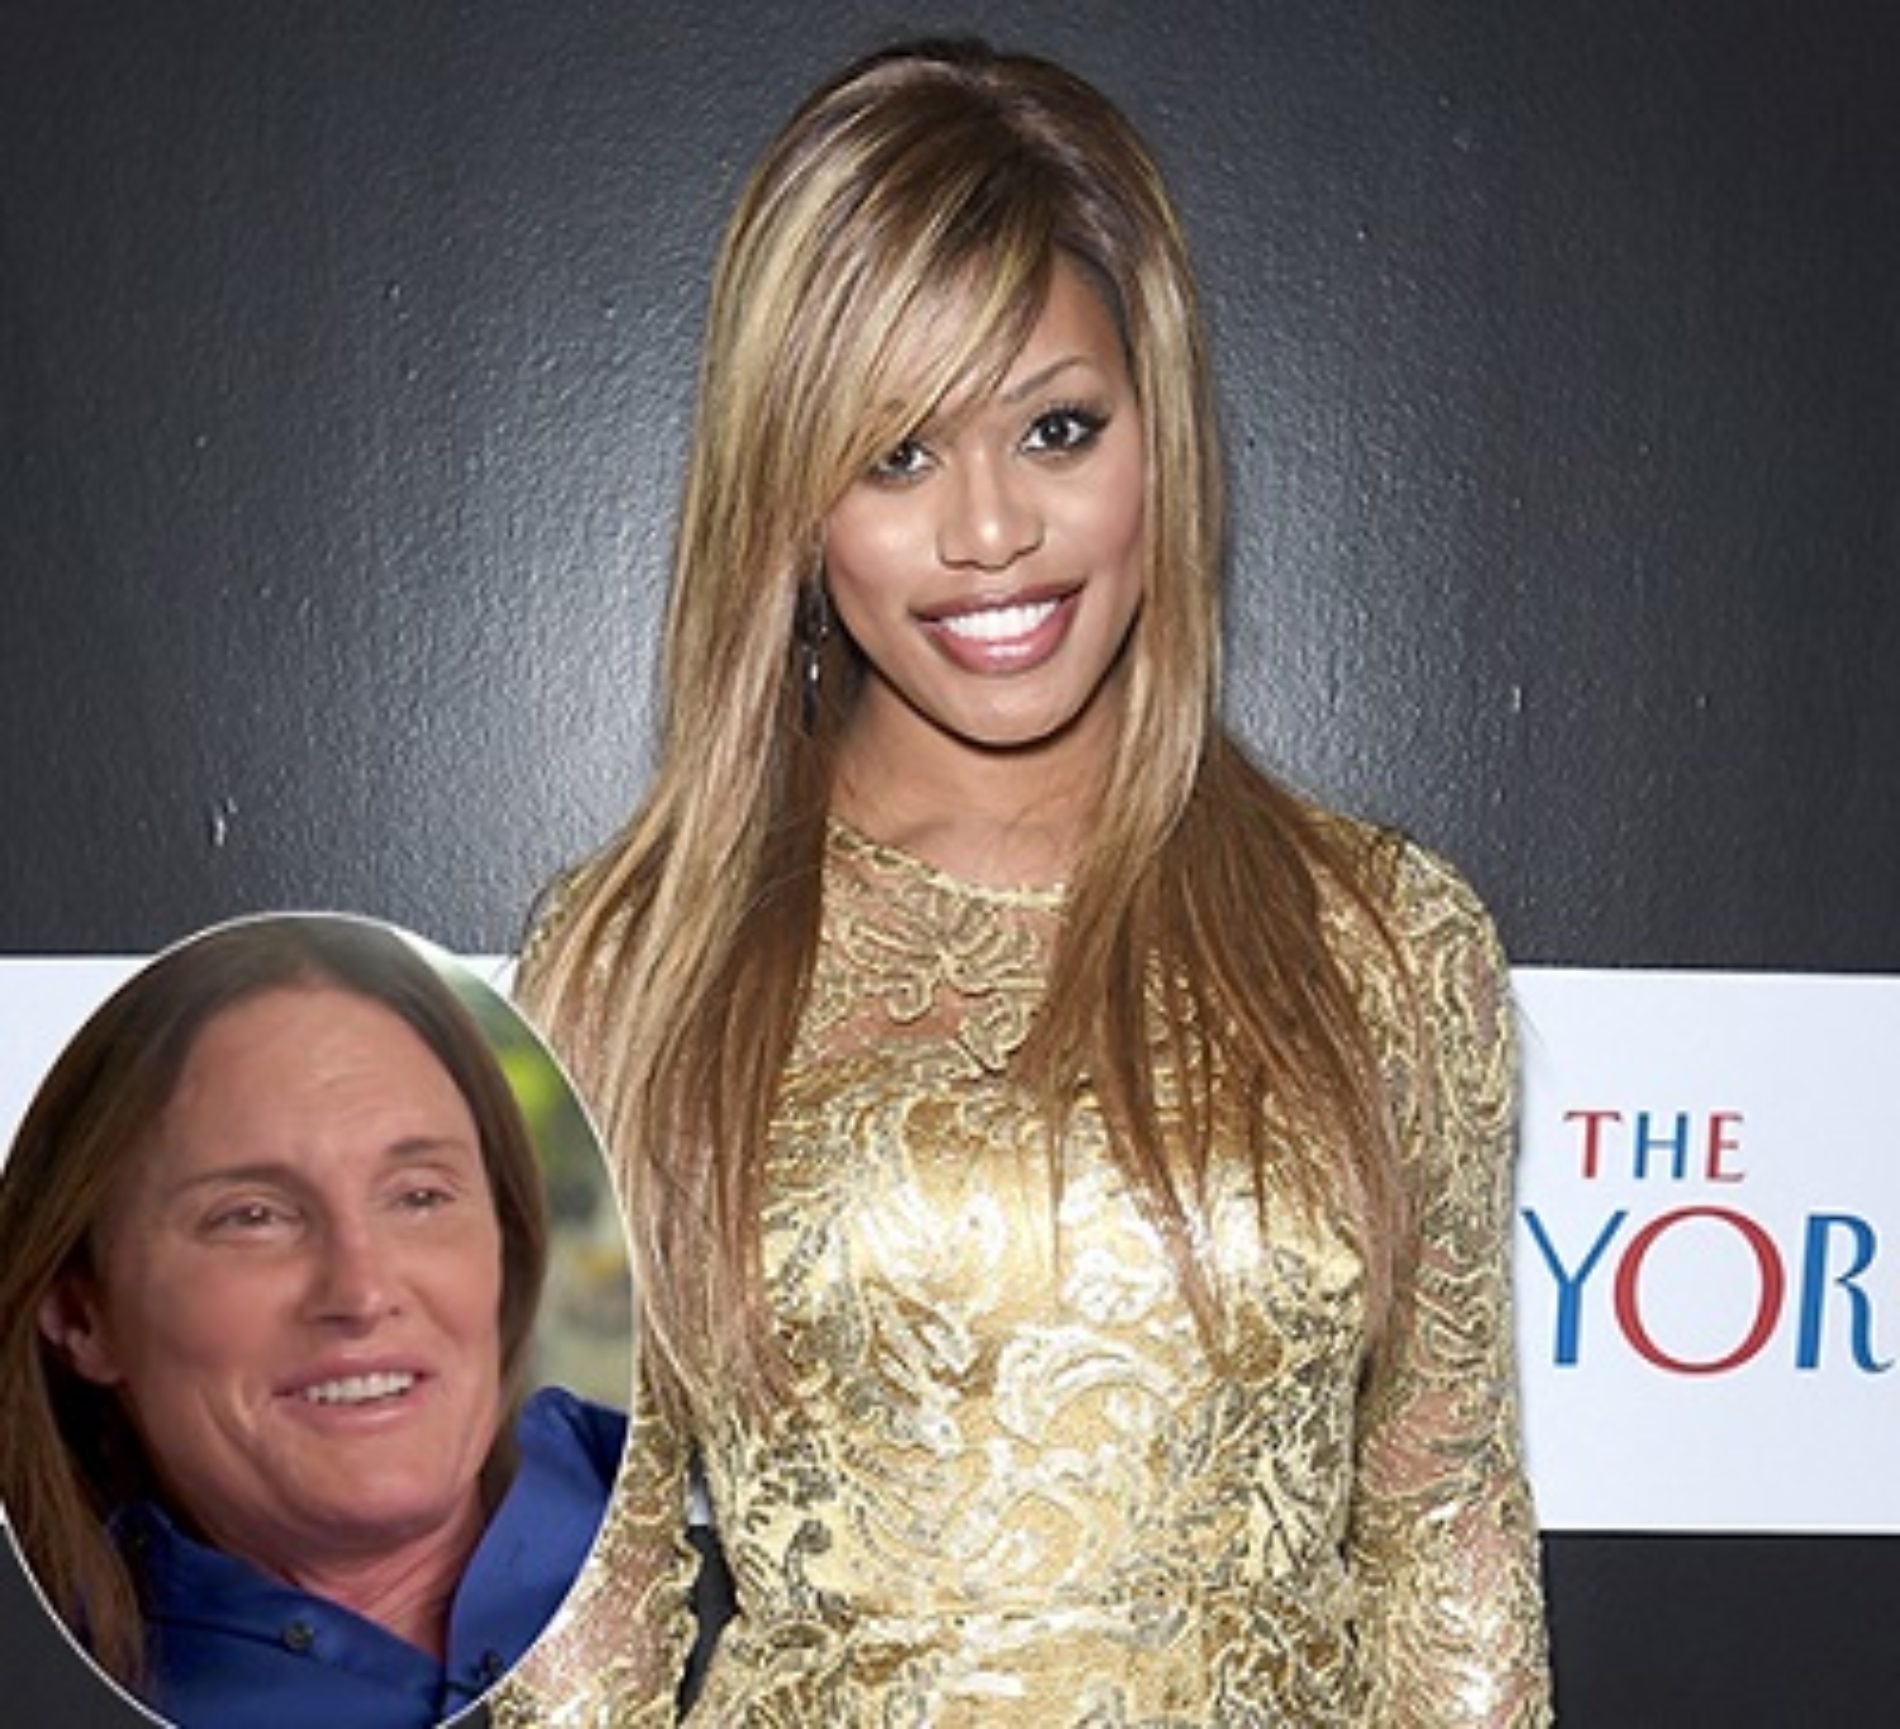 Bruce Jenner Made Contact With Laverne Cox